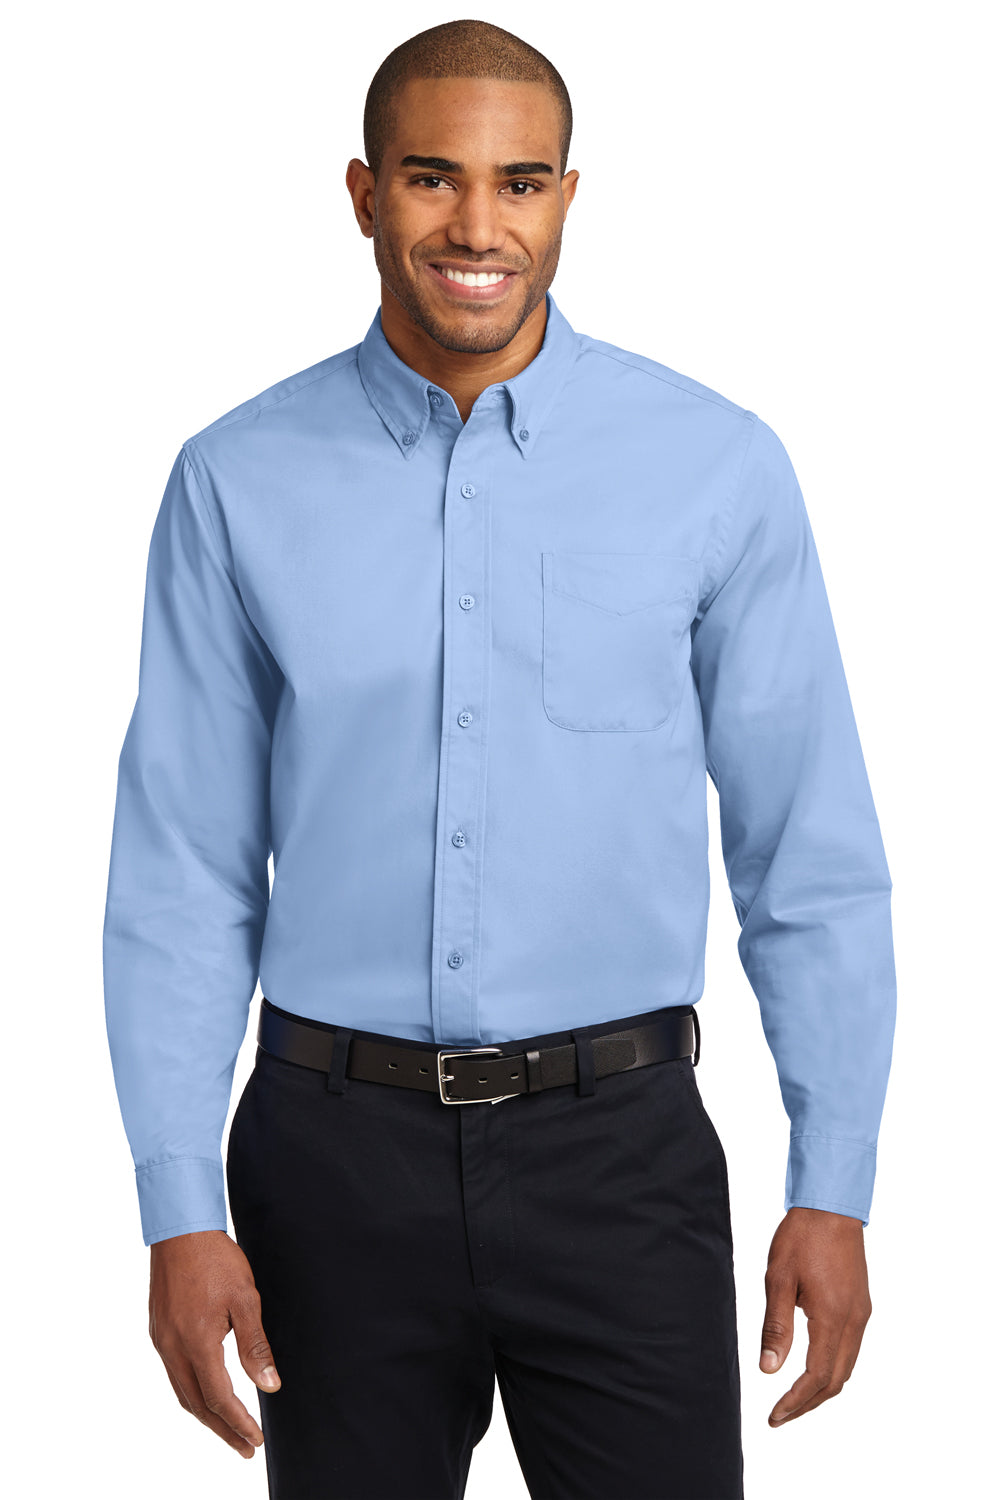 Port Authority S608/TLS608/S608ES Mens Light Blue Easy Care Wrinkle  Resistant Long Sleeve Button Down Shirt w/ Pocket —